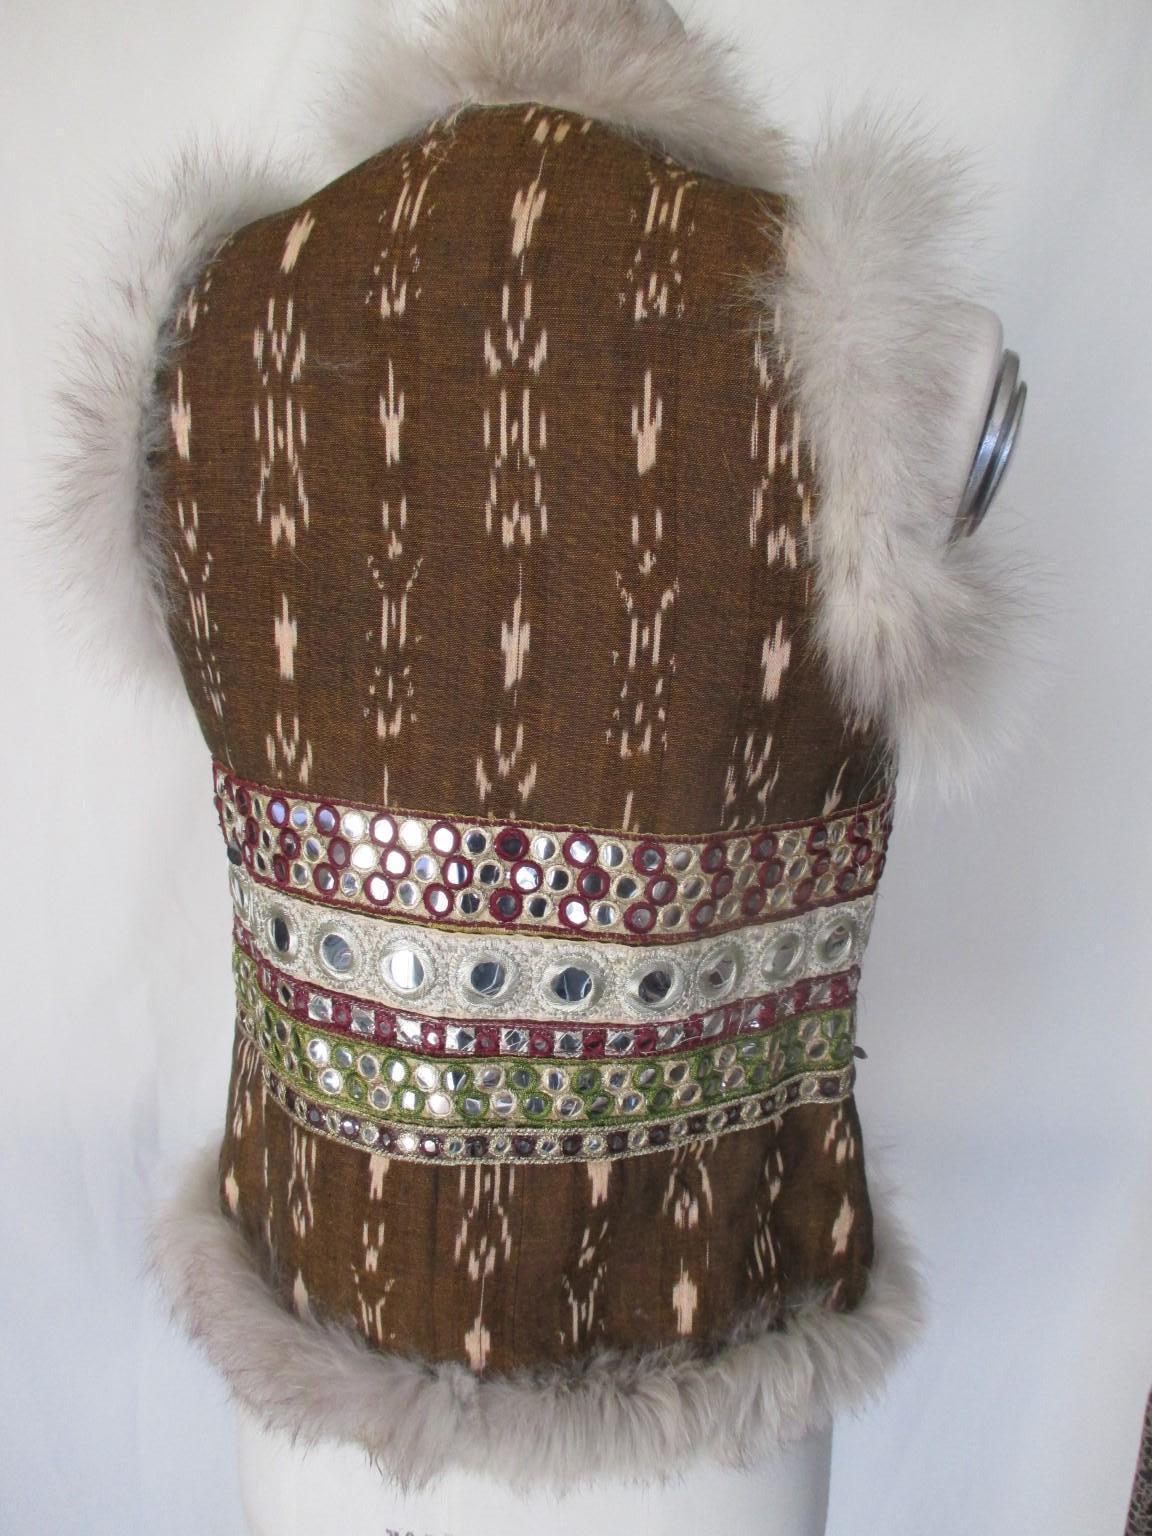 This beautiful vest is with fox fur embroidered and silver details

We offer more exclusive fur items, view our frontstore

Details:
2 pockets, no buttons, no label
Ikat fabric
Silver details
Pre owned condition
Size fits as small, see section